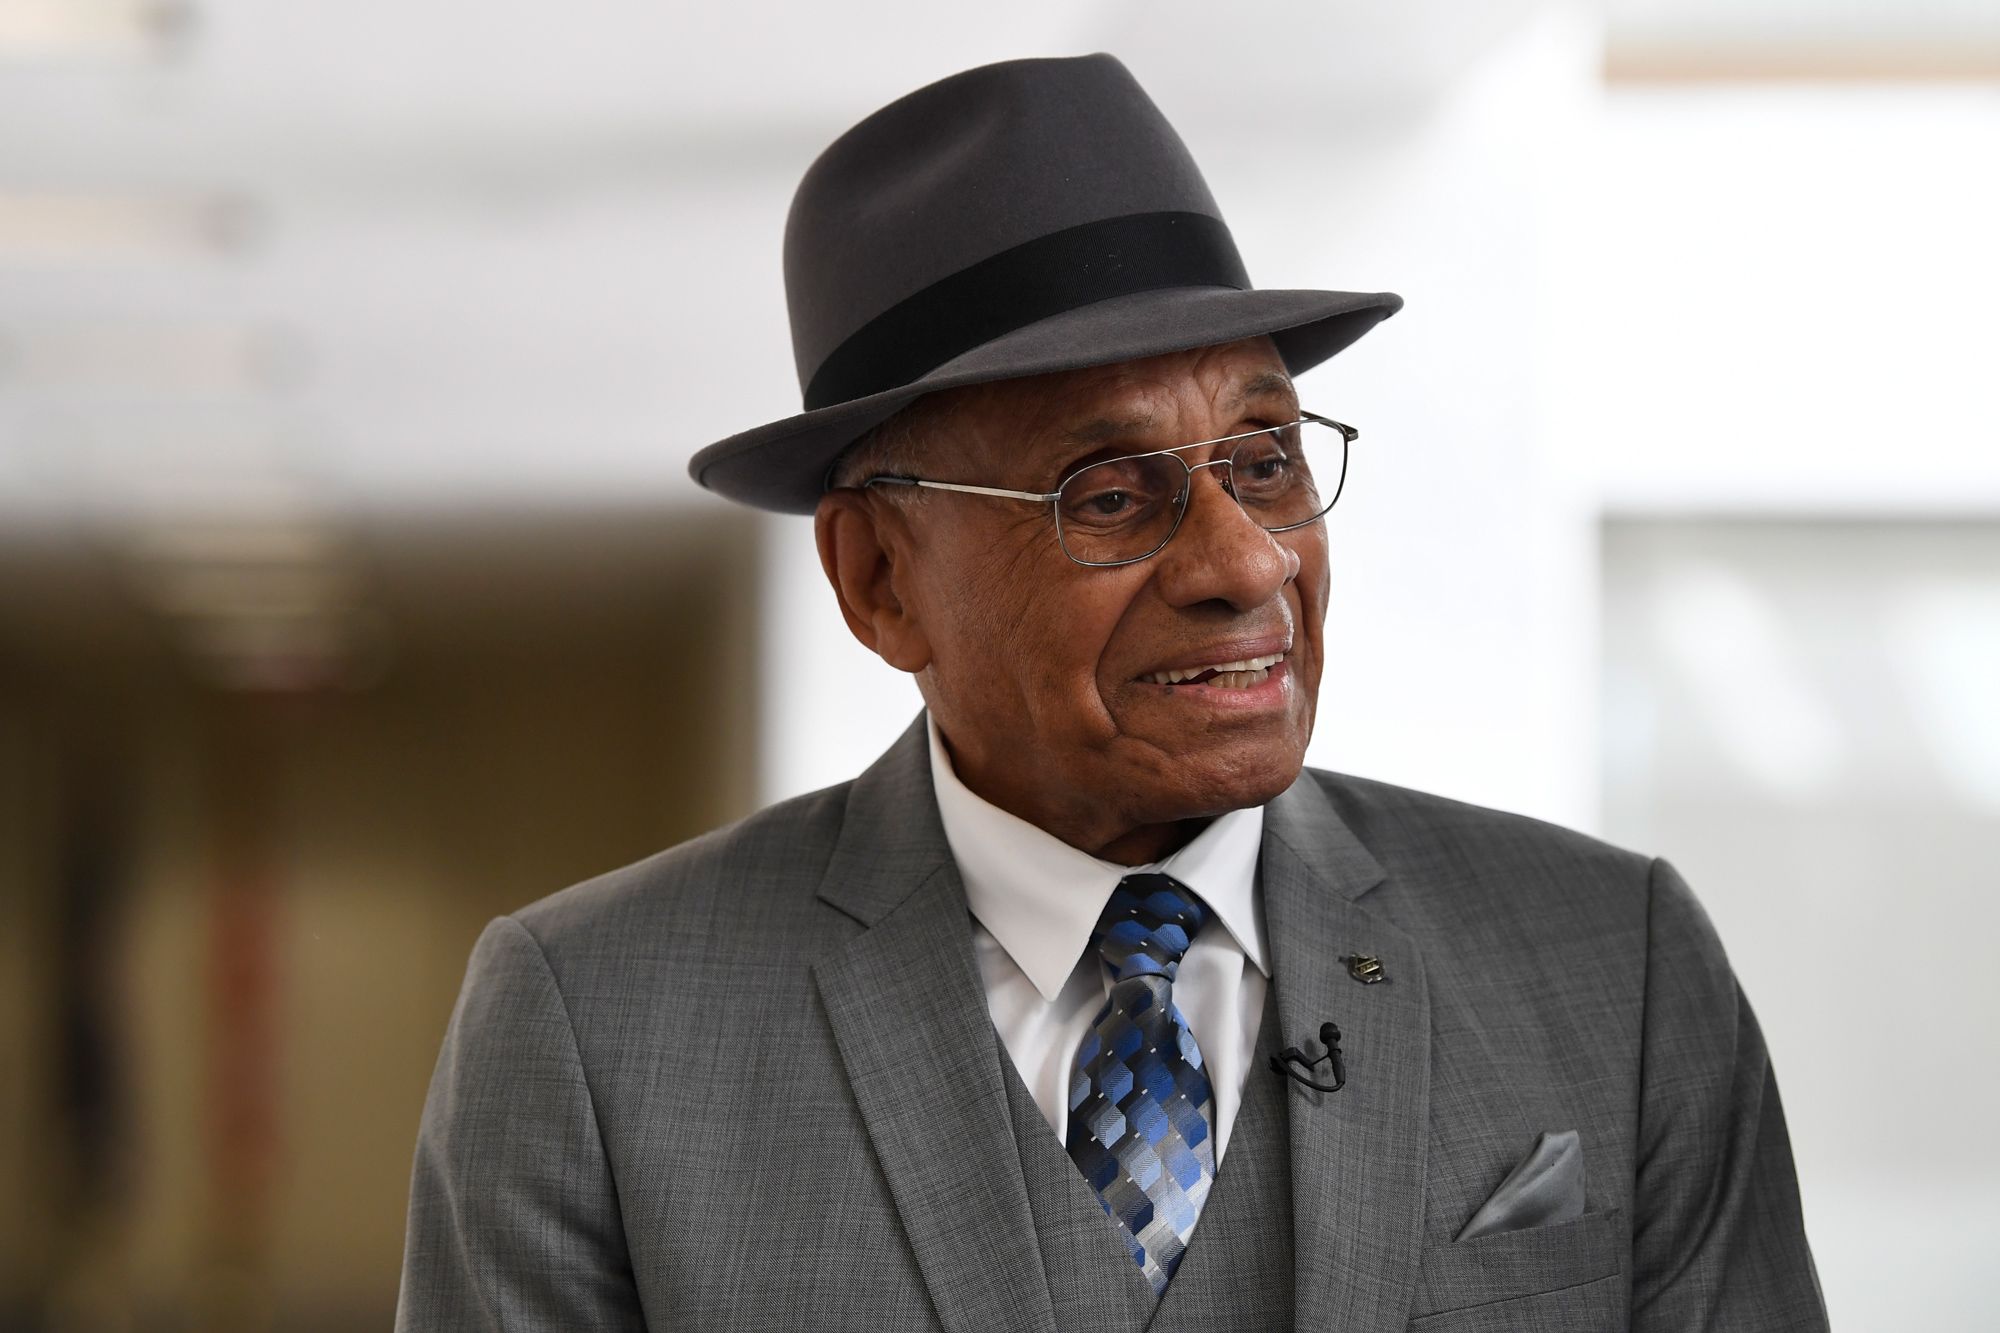 Bruins to retire #22 jersey of Willie O'Ree, NHL's first Black